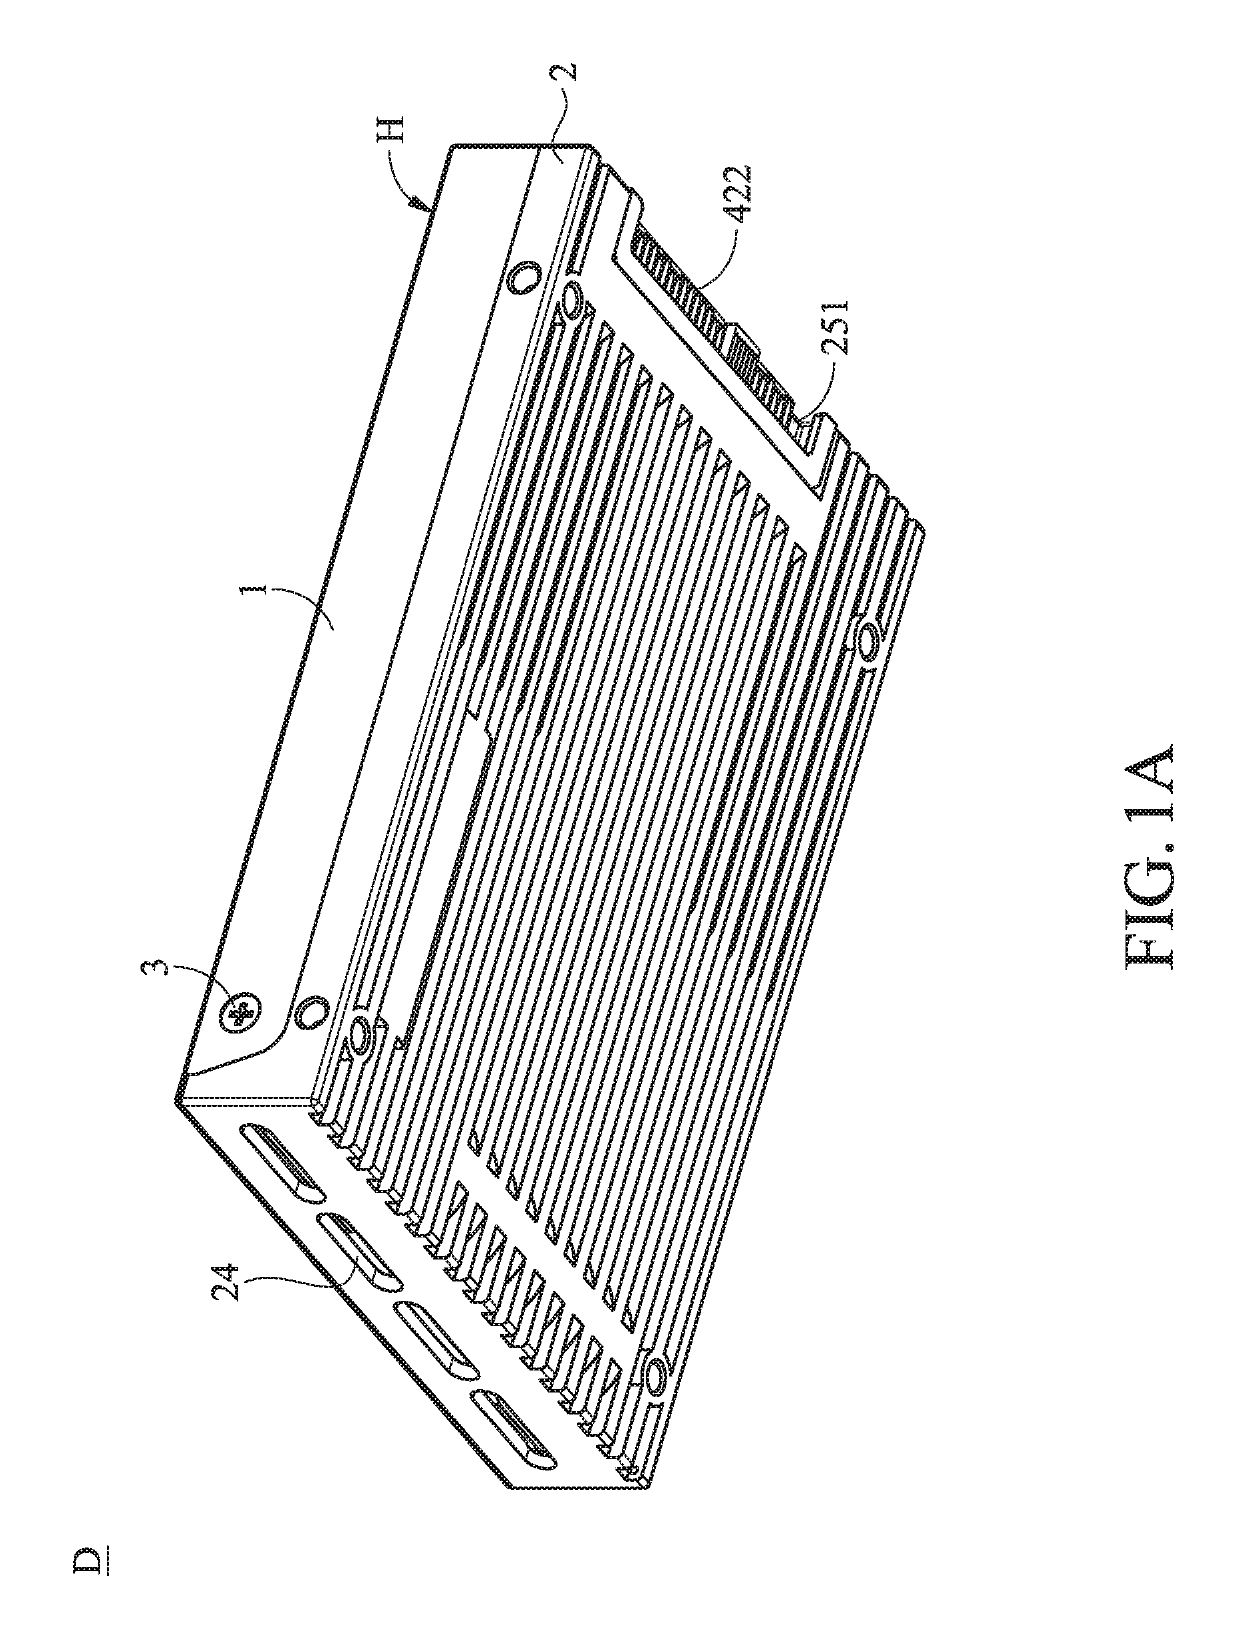 Solid state memory device